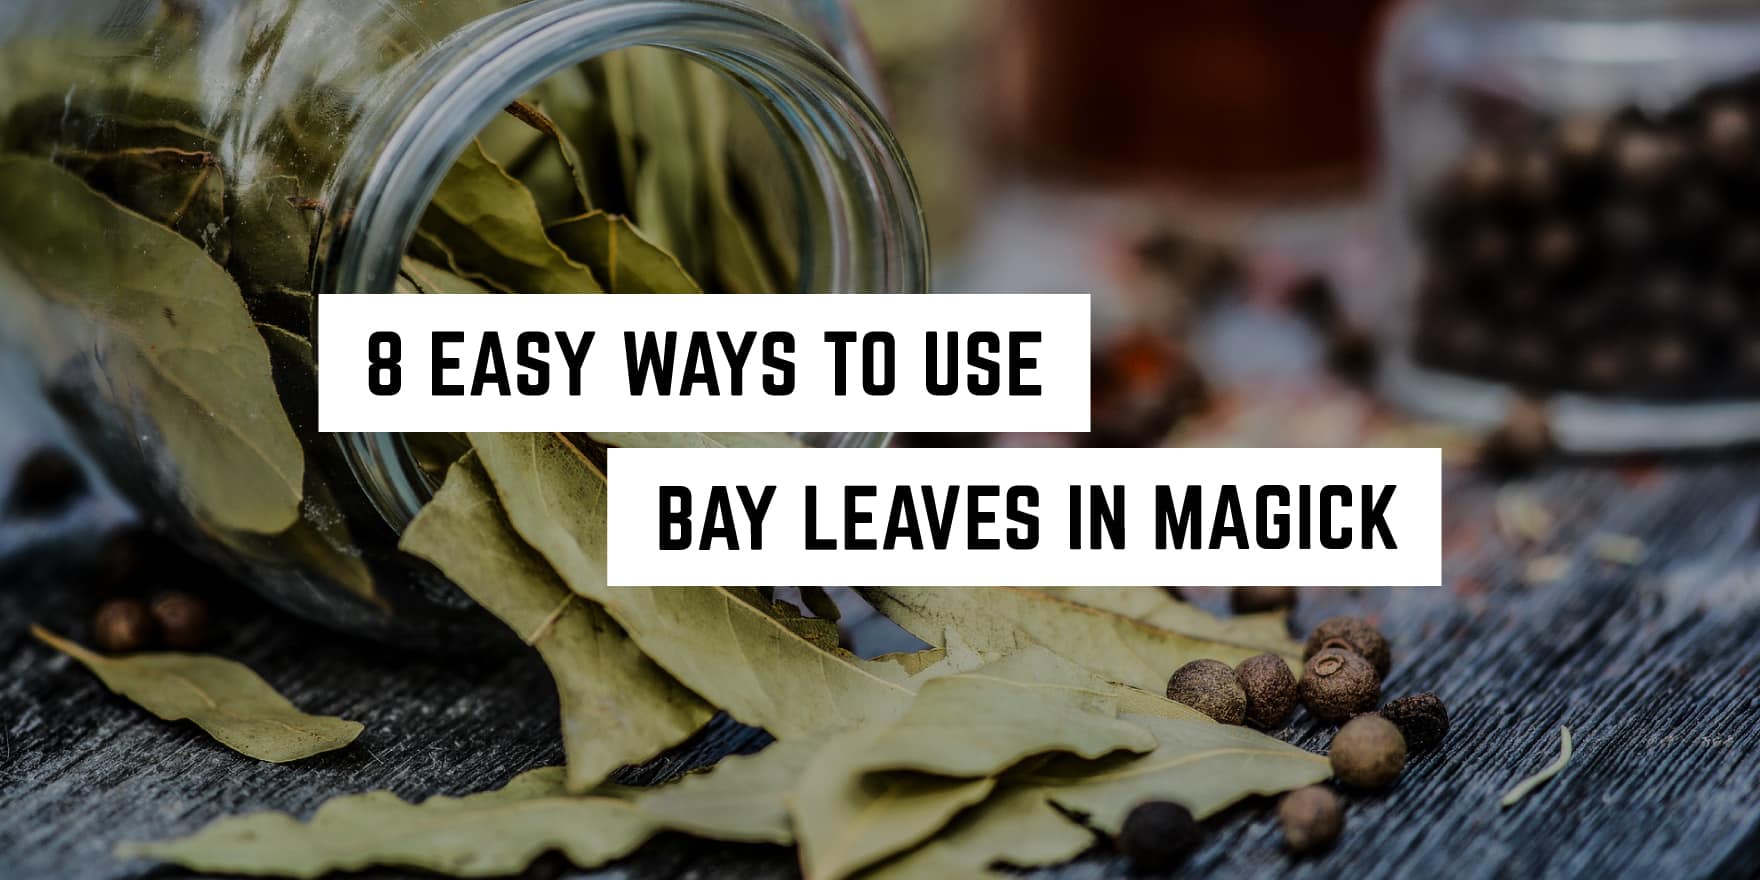 8 Ways to Use Bay Leaves in Magick